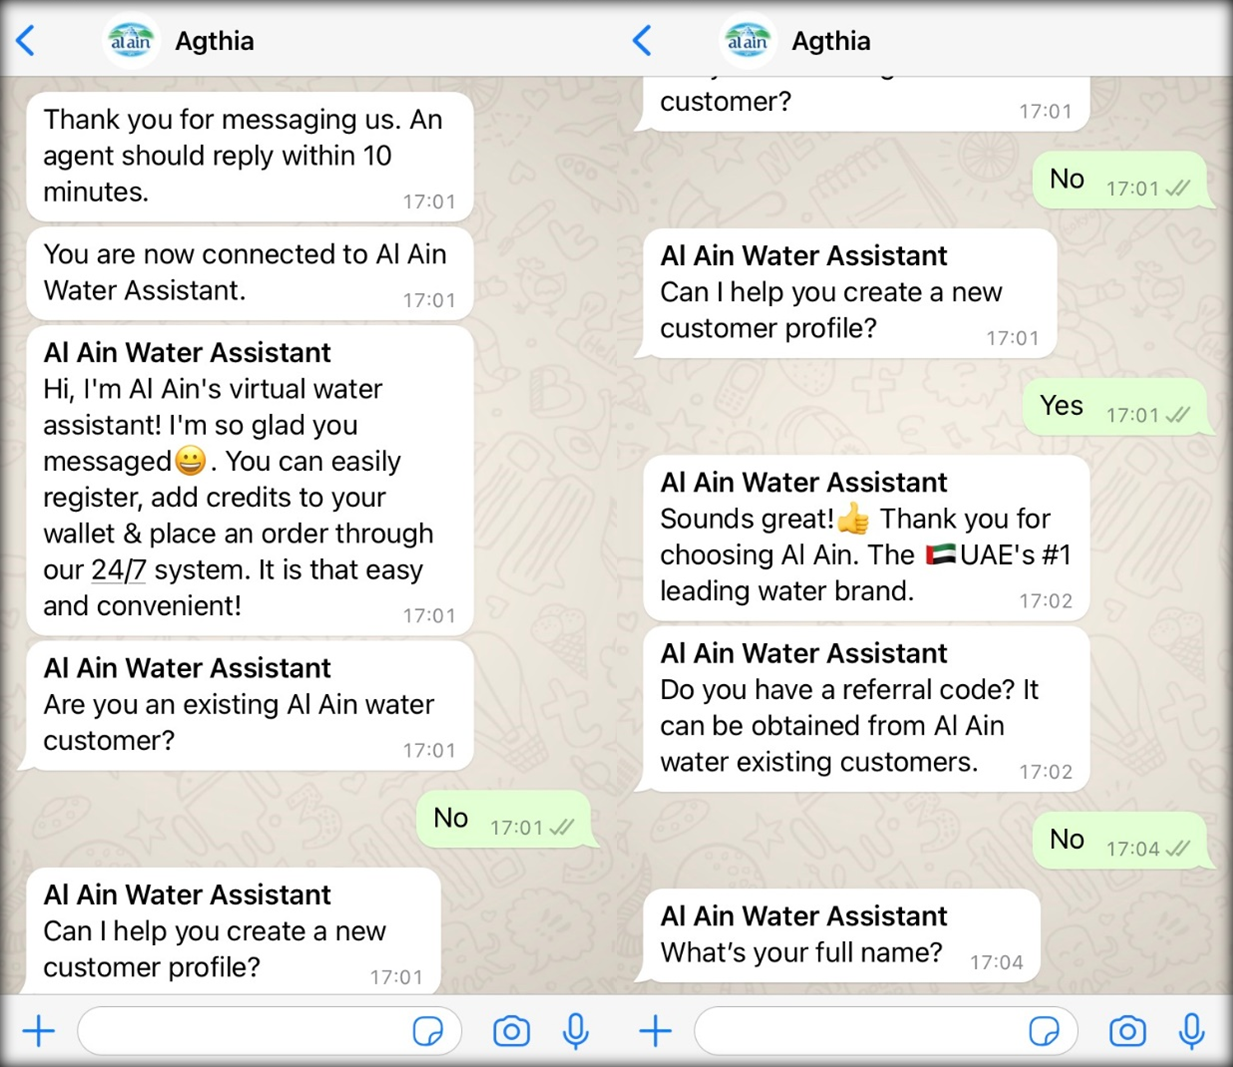 Examples of WhatsApp deployment for Agthia